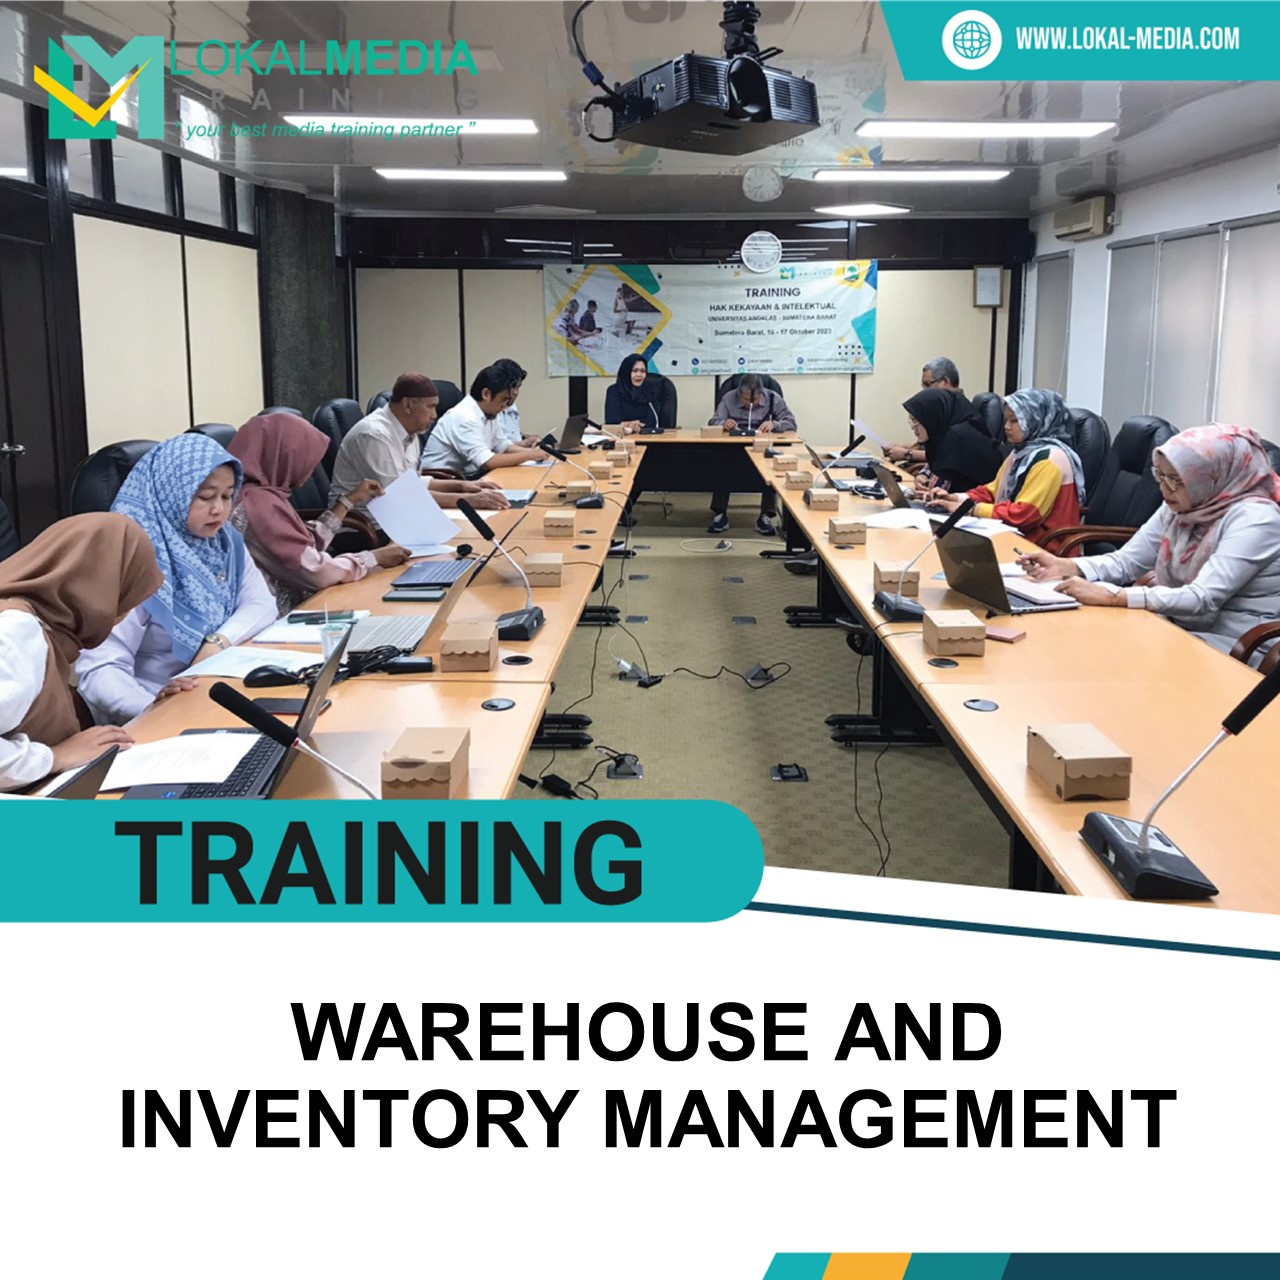 TRAINING WAREHOUSE AND INVENTORY MANAGEMENT